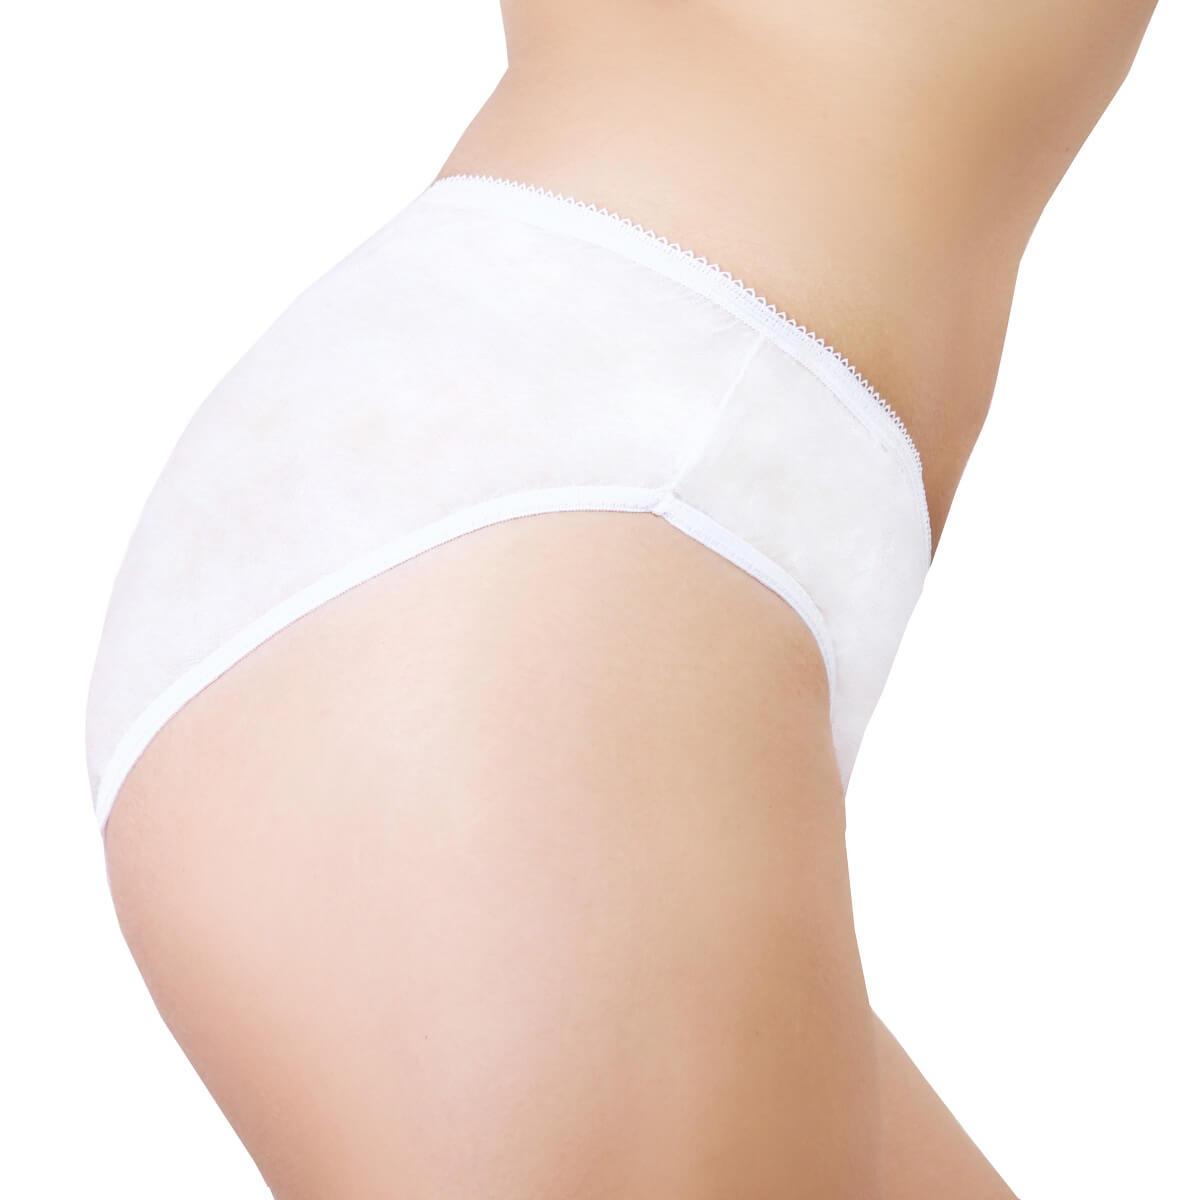 Disposable knickers paper panties pants briefs for hospital maternity – OW- Travel